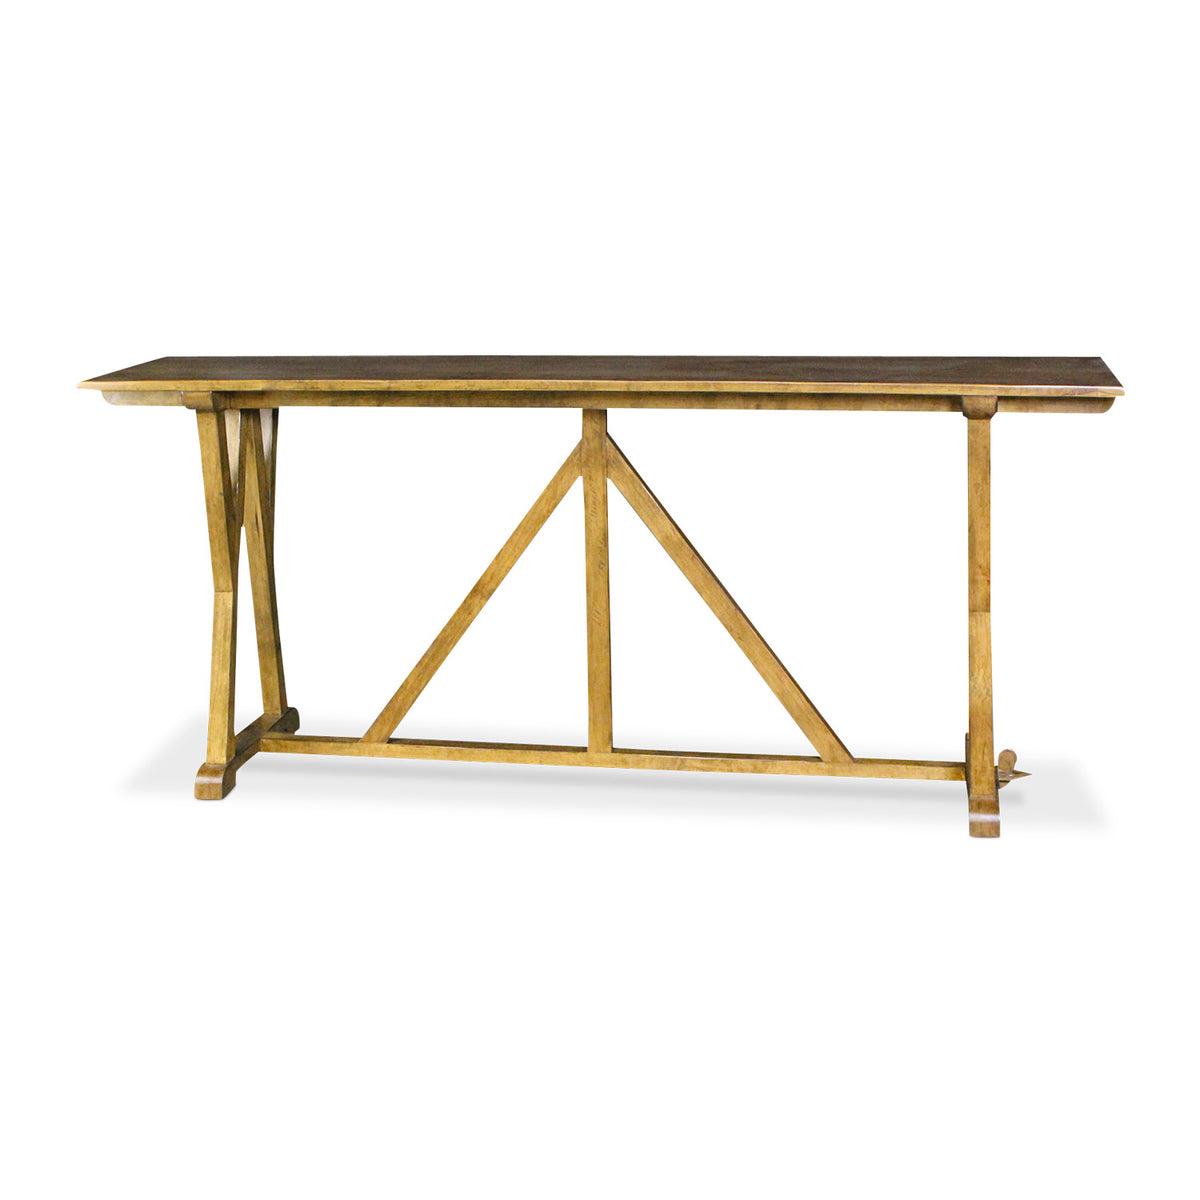 Cold Spring Hall Table